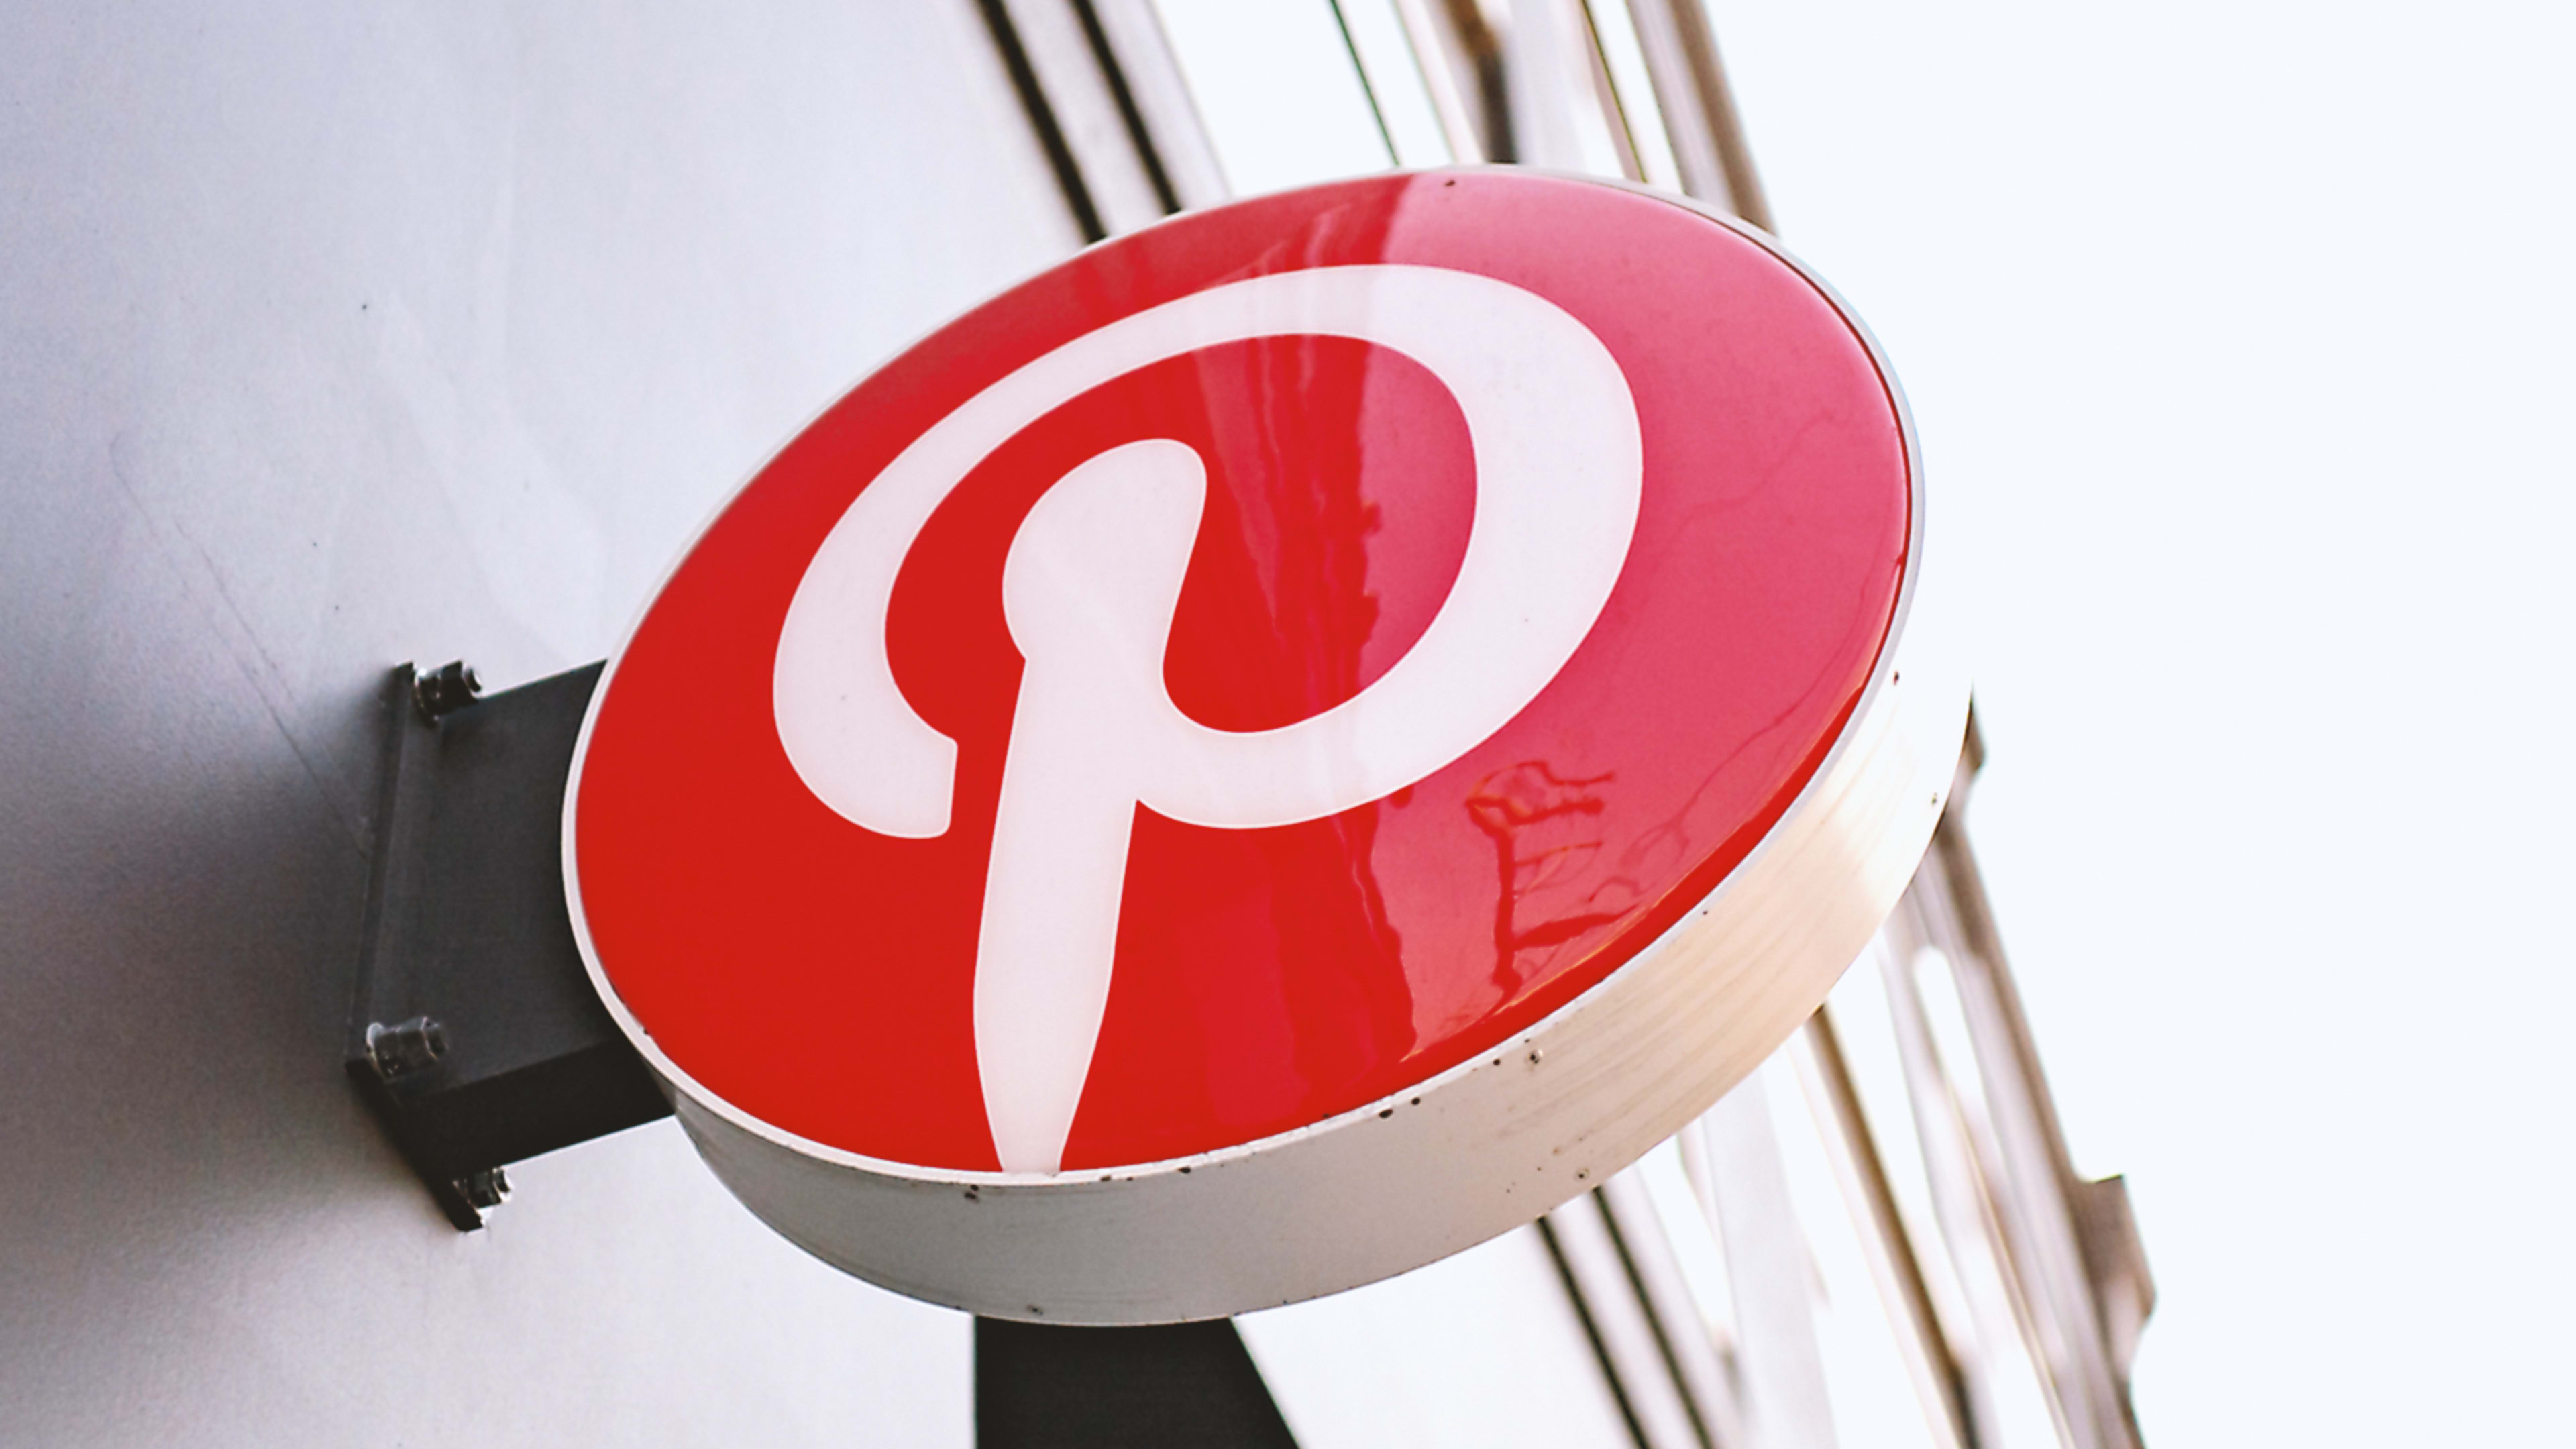 Pinterest reportedly files for IPO